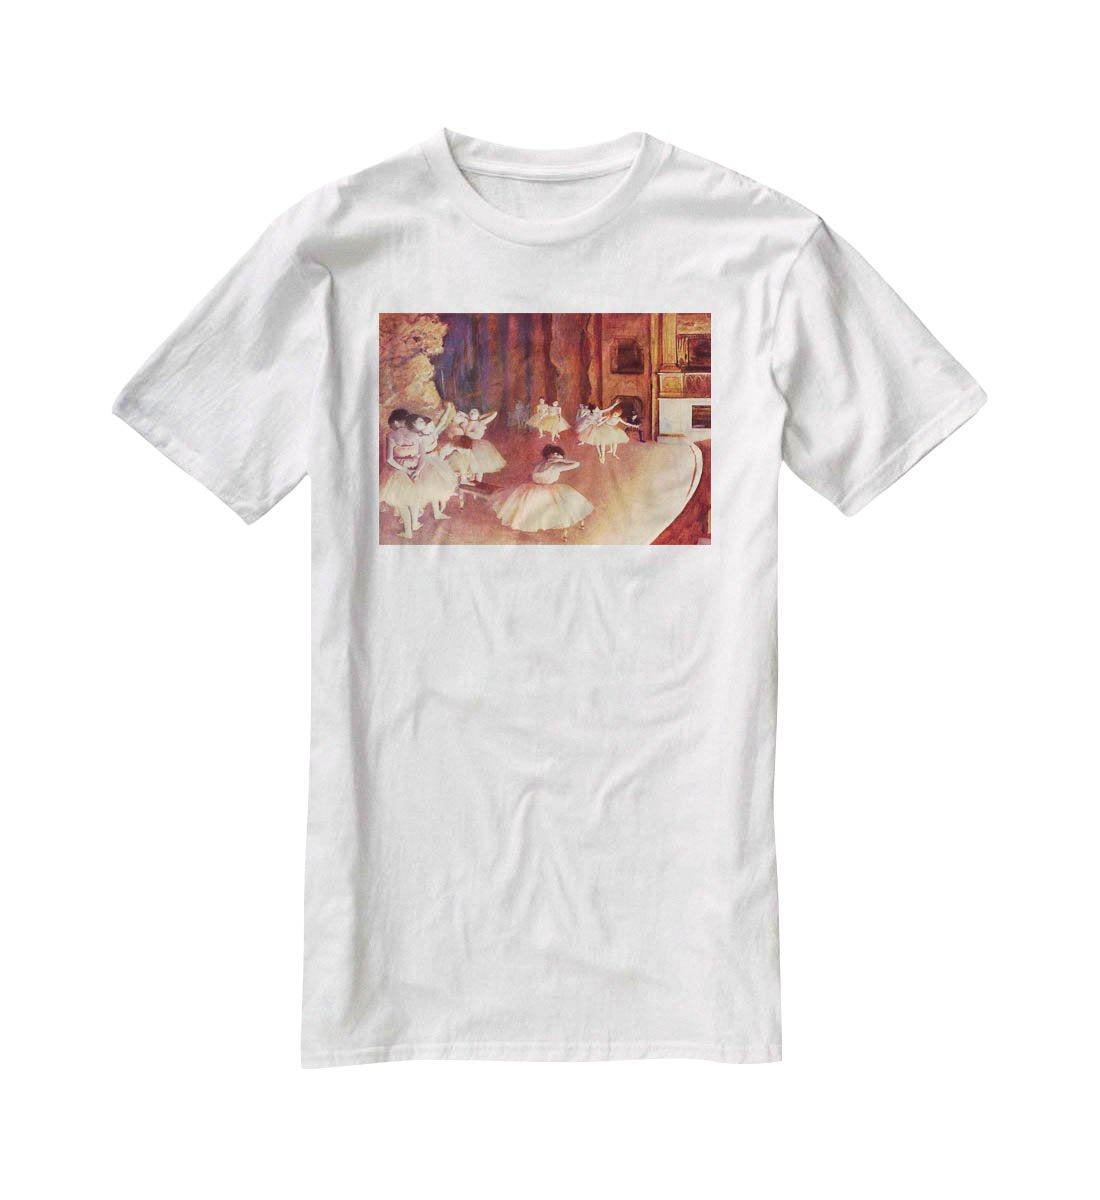 Dress rehearsal of the ballet on the stage by Degas T-Shirt - Canvas Art Rocks - 5